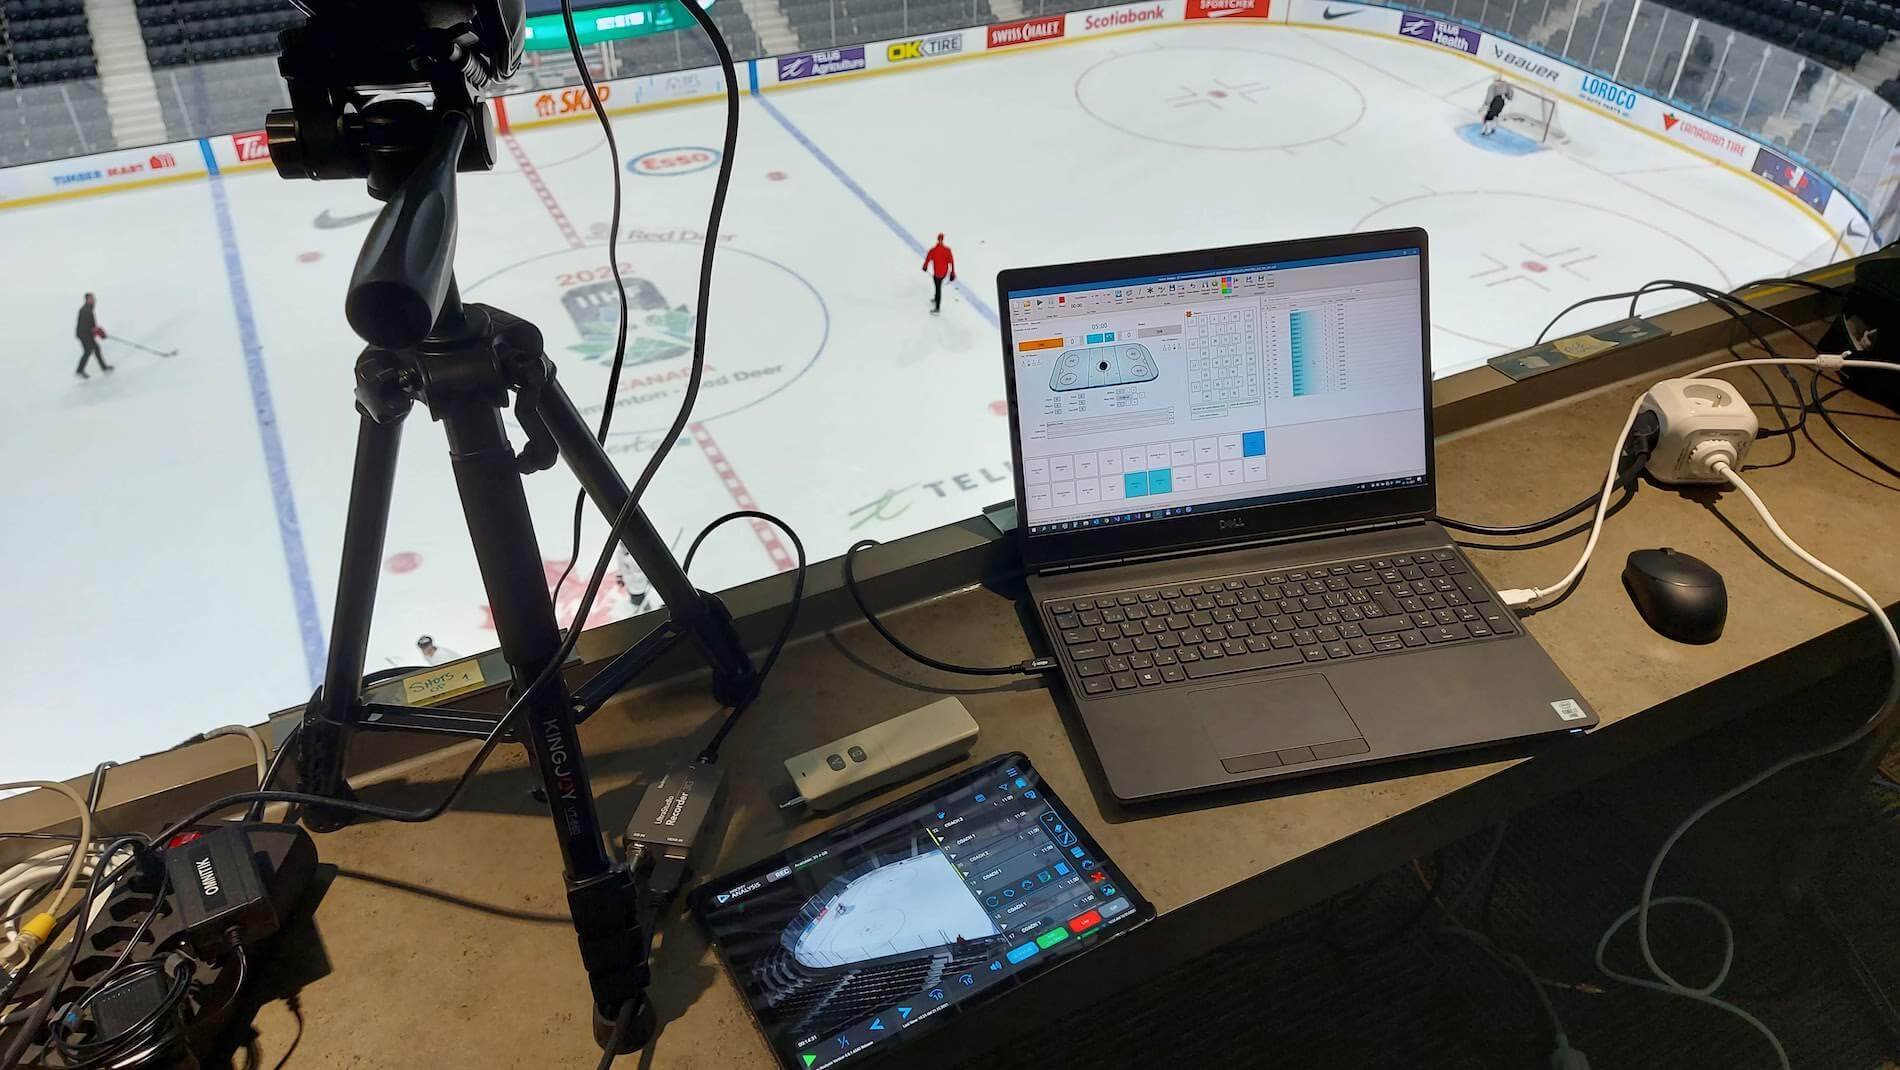 Video streaming a hockey game on a laptop